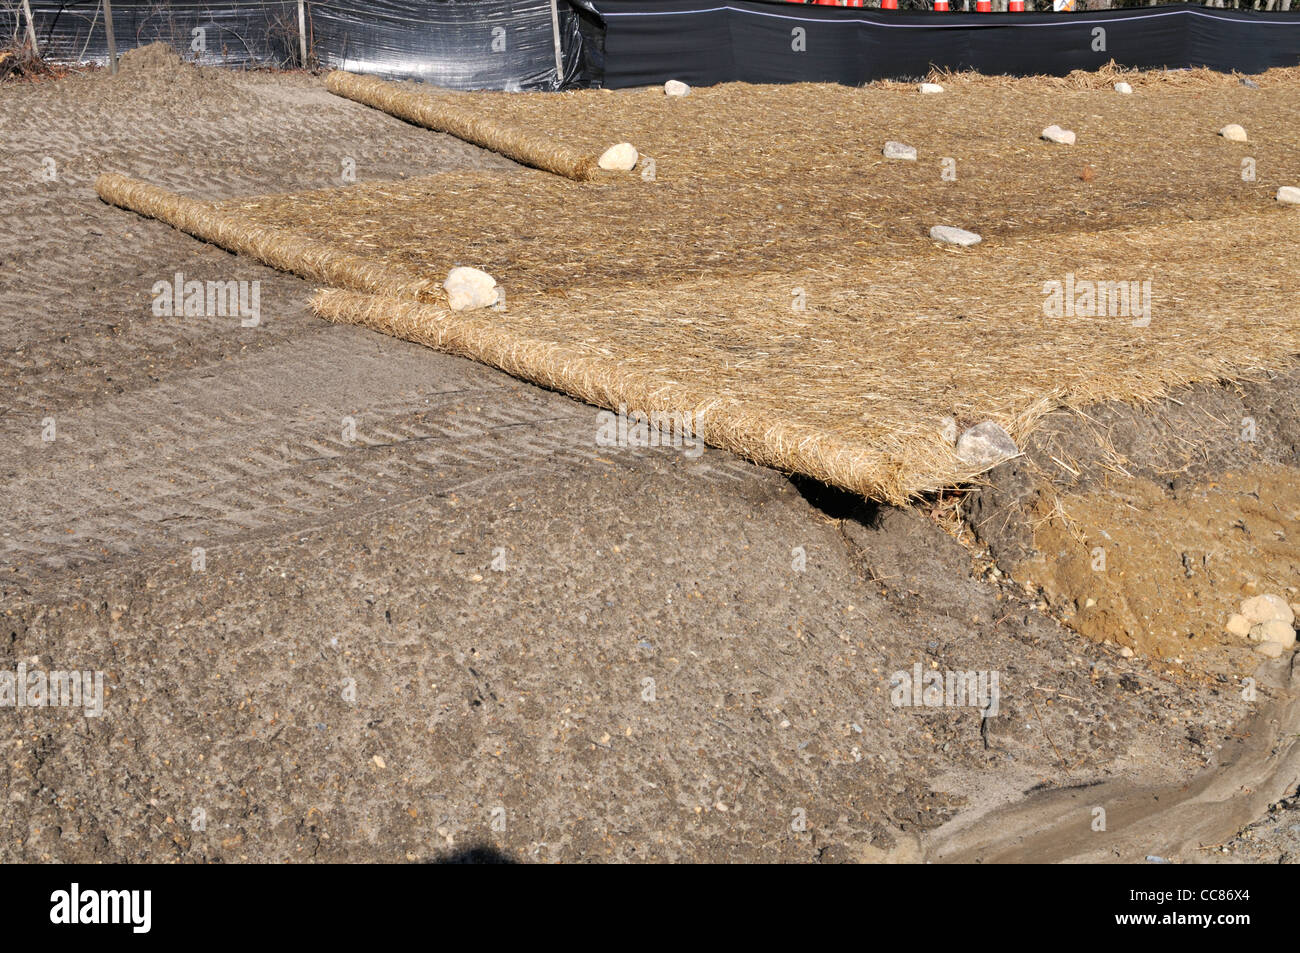 Rolls of biodegradable erosion control blanket on side of new road construction USA Stock Photo